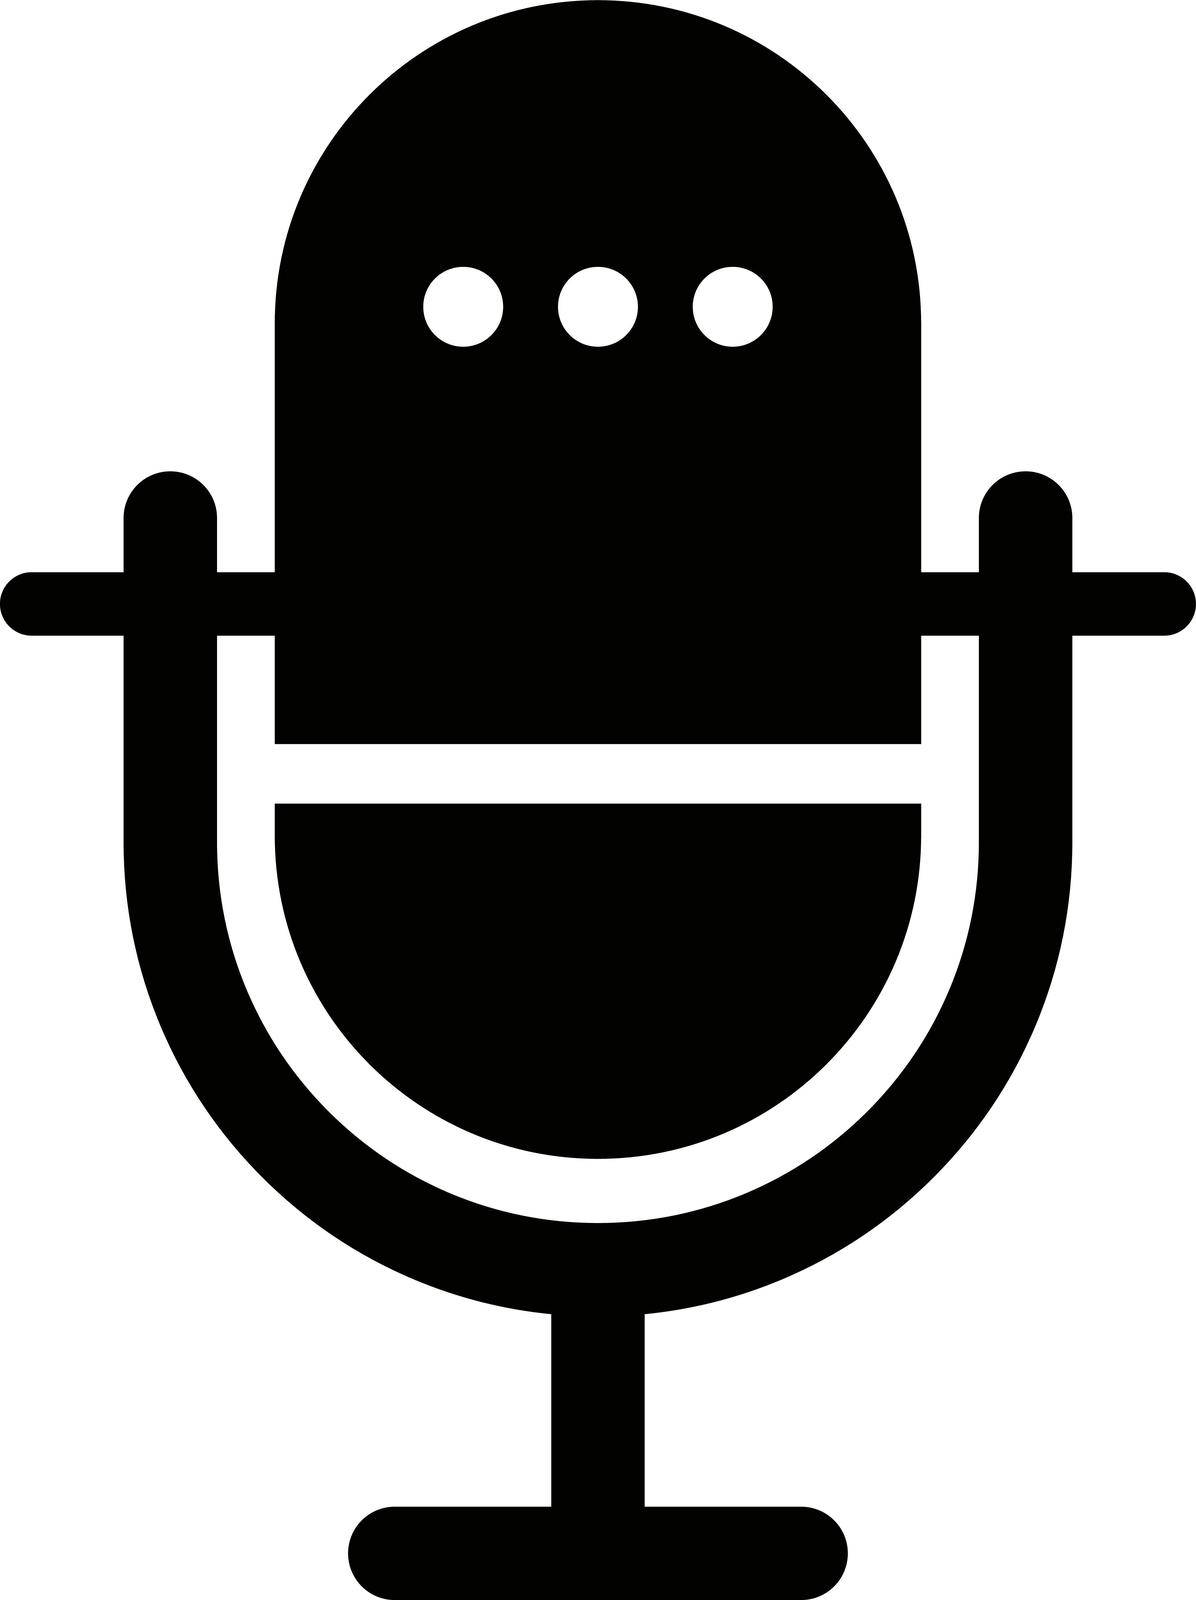 Fashionable microphone icon. Black color with vector. It is a retro icon. Editable vector.